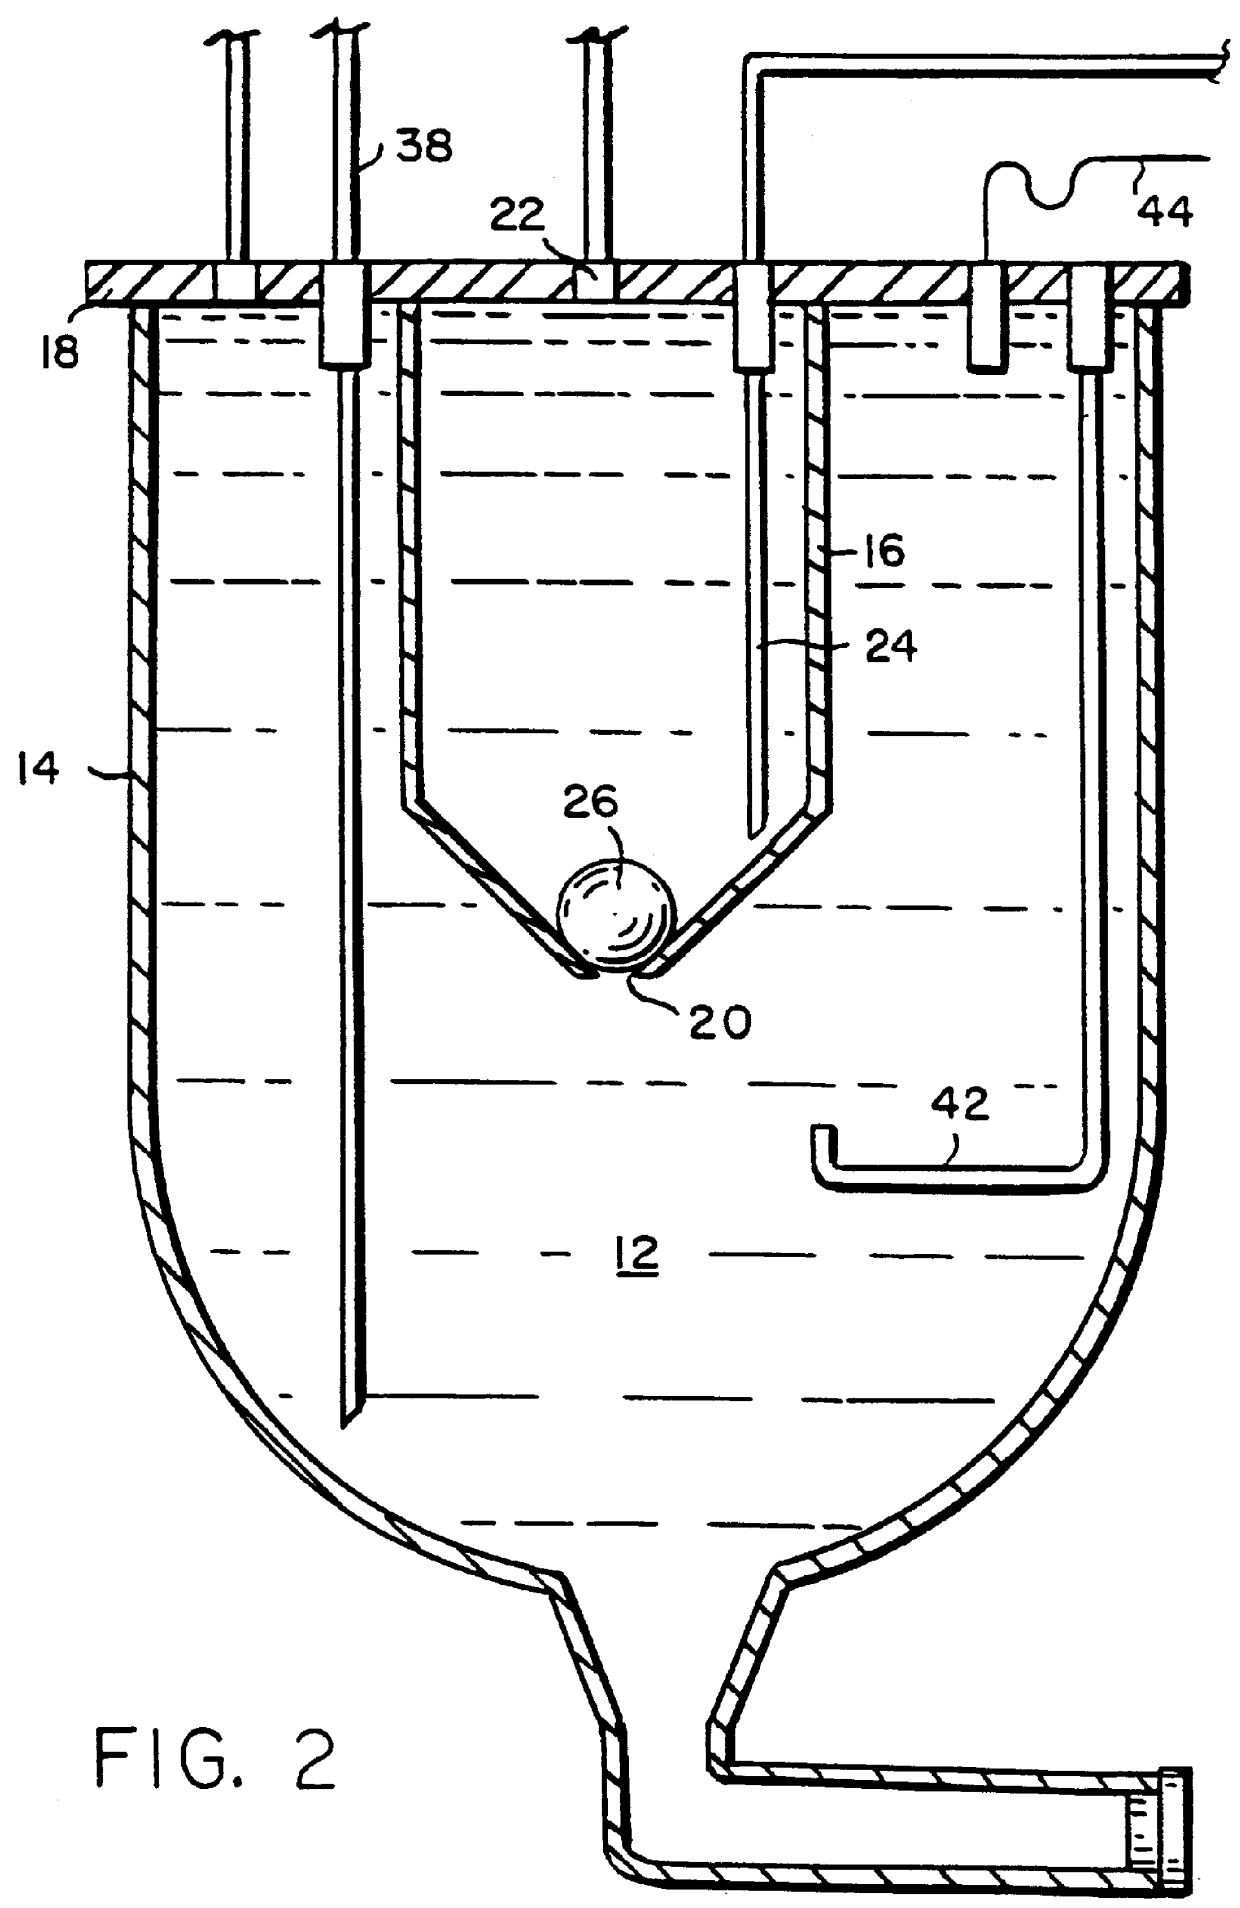 Apparatus for consecutively dispensing an equal volume of liquid